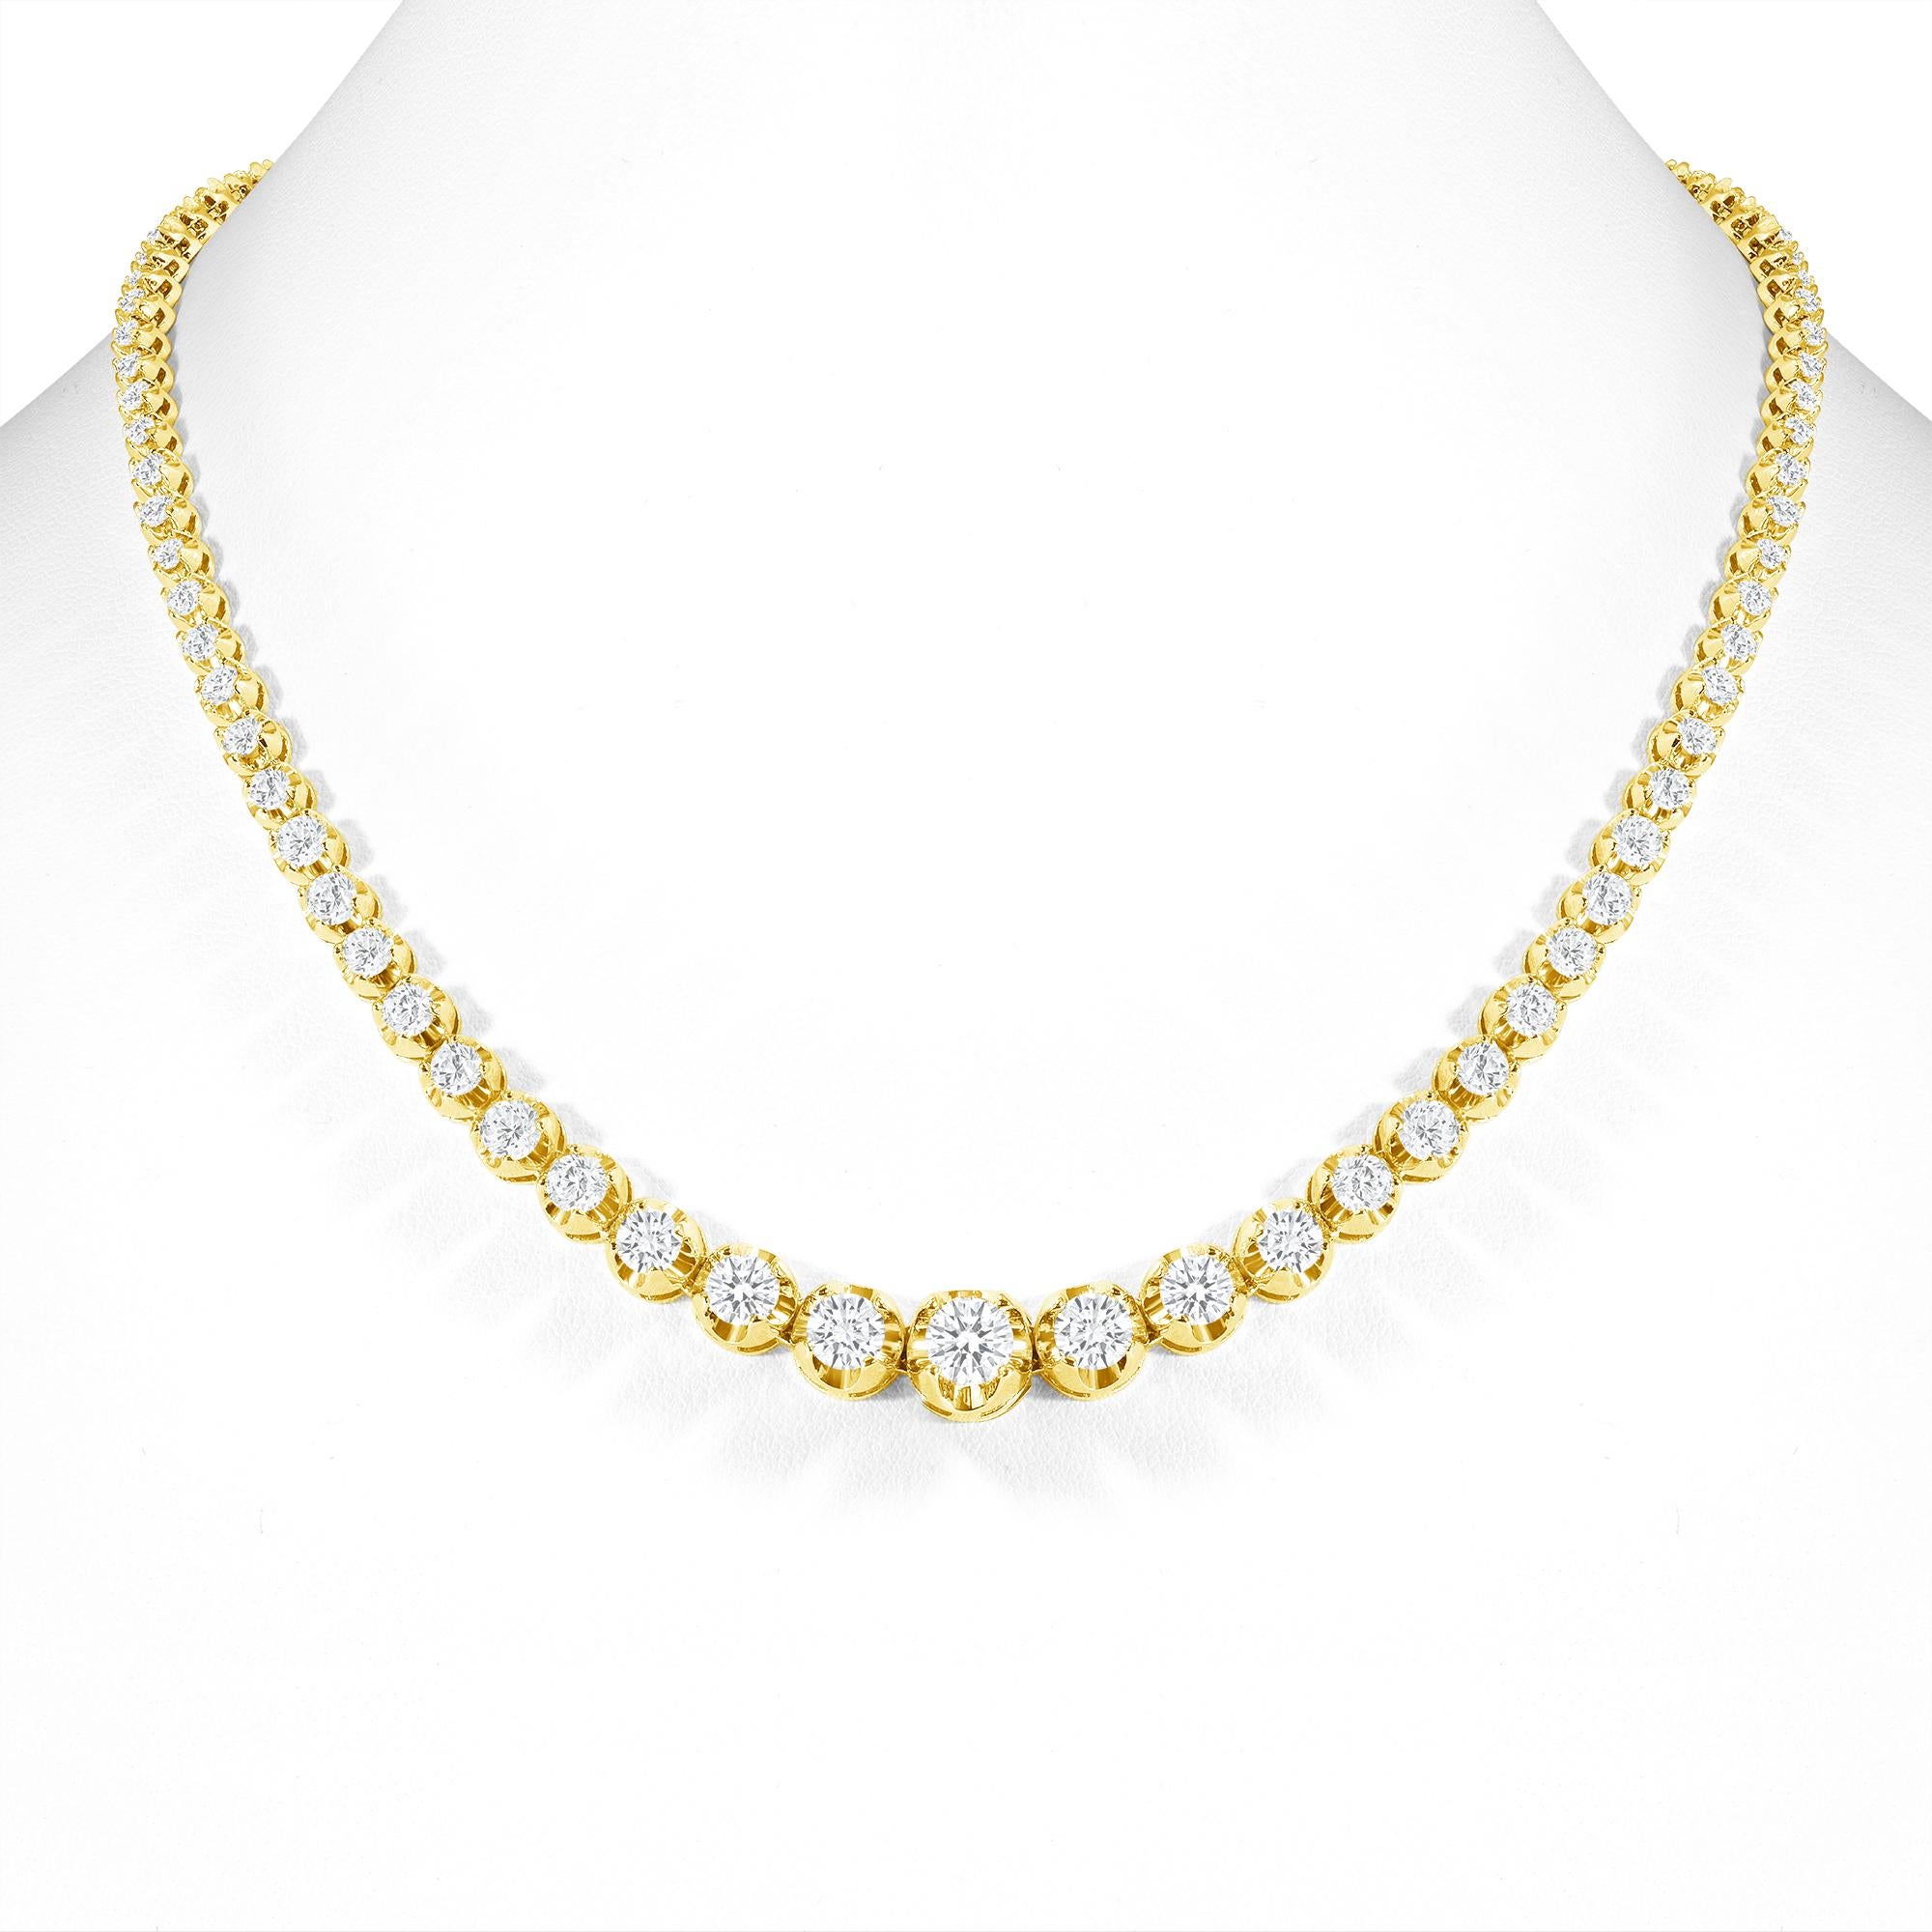 This finely made graduated necklace with beautiful round diamonds sits elegantly on any neck. 

Metal: 14k Gold
Diamond Cut: Round
Total Diamond Approx. Carats:  7ct
Diamond Clarity: VS
Diamond Color: F-G
Size: 20 inches
Color: Yellow Gold
Included